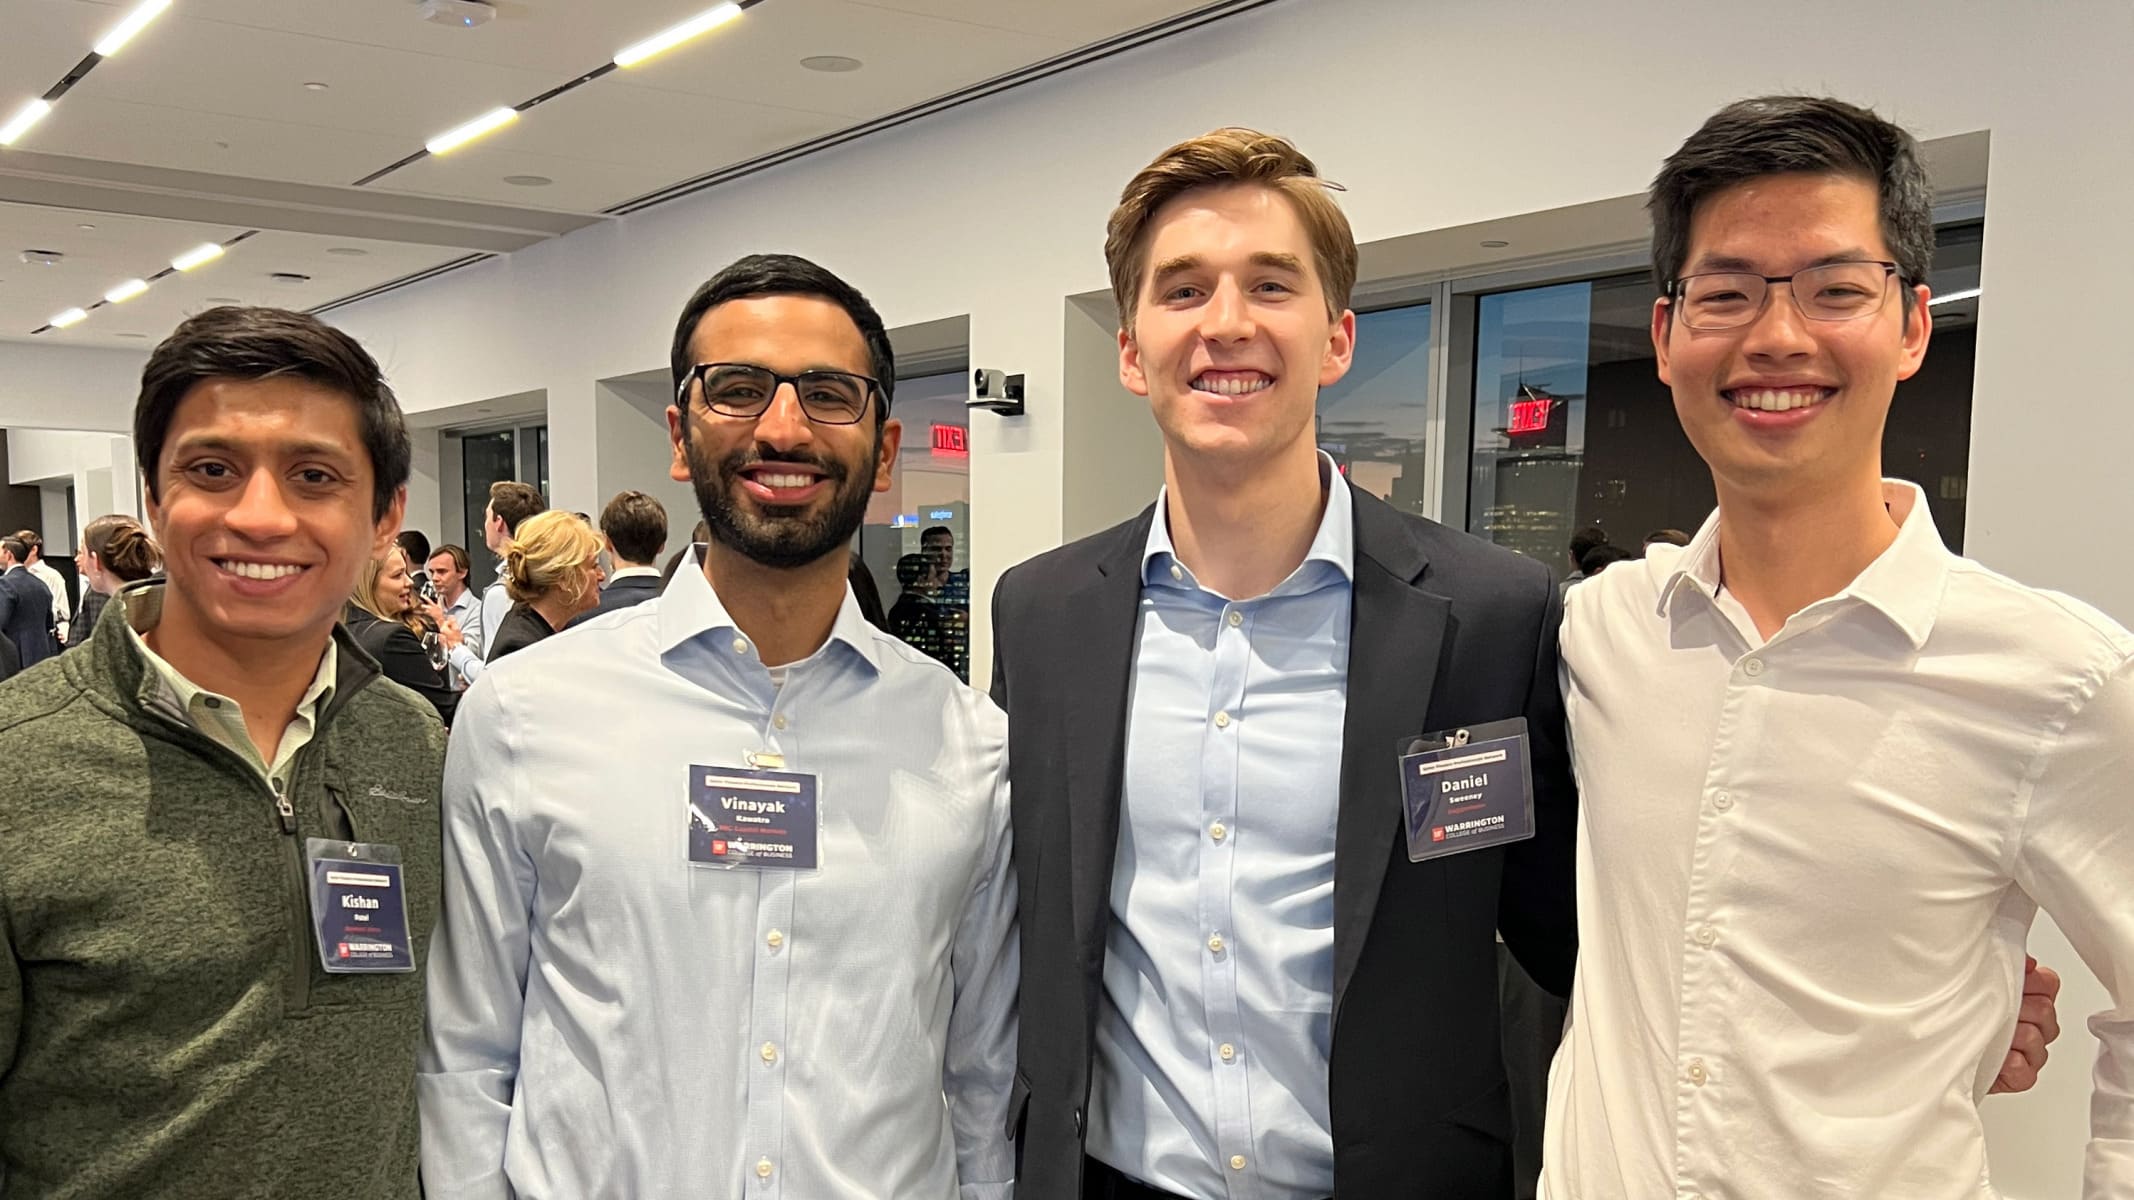 Four attendees at the 13th Annual NYC Gathering of the Gator Finance Professional